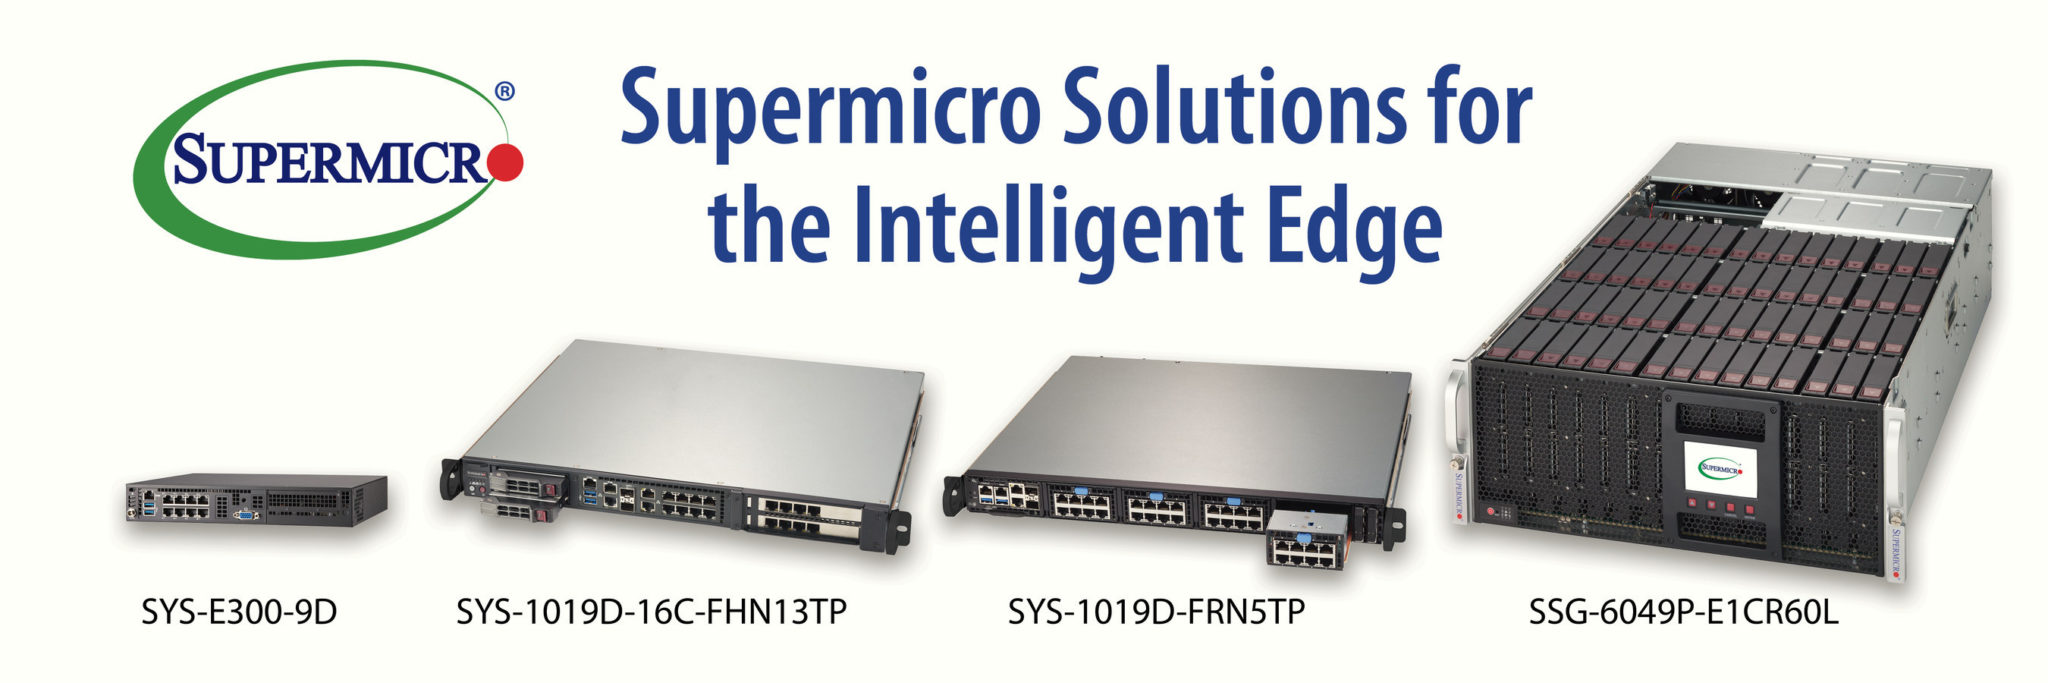 supermicro-expands-global-partner-network-with-new-worldwide-partner-enablement-program